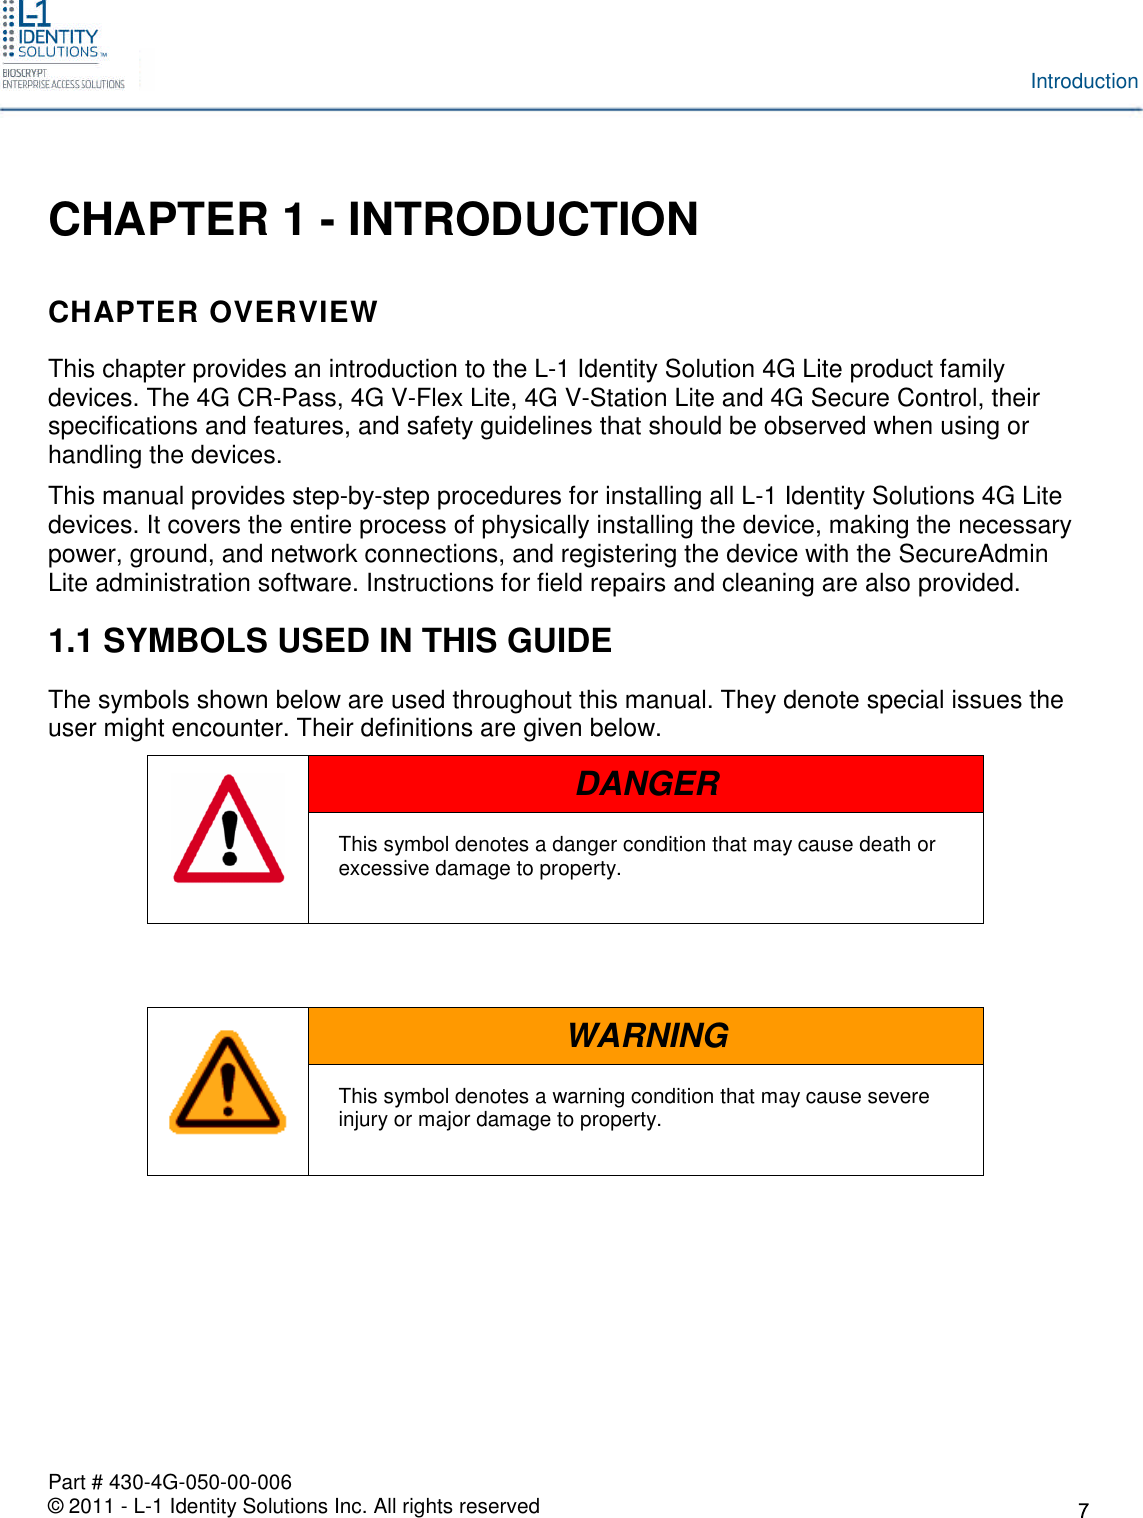 Part # 430-4G-050-00-006© 2011 - L-1 Identity Solutions Inc. All rights reservedIntroductionCHAPTER 1 - INTRODUCTIONCHAPTER OVERVIEWThis chapter provides an introduction to the L-1 Identity Solution 4G Lite product familydevices. The 4G CR-Pass, 4G V-Flex Lite, 4G V-Station Lite and 4G Secure Control, theirspecifications and features, and safety guidelines that should be observed when using orhandling the devices.This manual provides step-by-step procedures for installing all L-1 Identity Solutions 4G Litedevices. It covers the entire process of physically installing the device, making the necessarypower, ground, and network connections, and registering the device with the SecureAdminLite administration software. Instructions for field repairs and cleaning are also provided.1.1 SYMBOLS USED IN THIS GUIDEThe symbols shown below are used throughout this manual. They denote special issues theuser might encounter. Their definitions are given below.DANGERThis symbol denotes a danger condition that may cause death orexcessive damage to property.WARNINGThis symbol denotes a warning condition that may cause severeinjury or major damage to property.